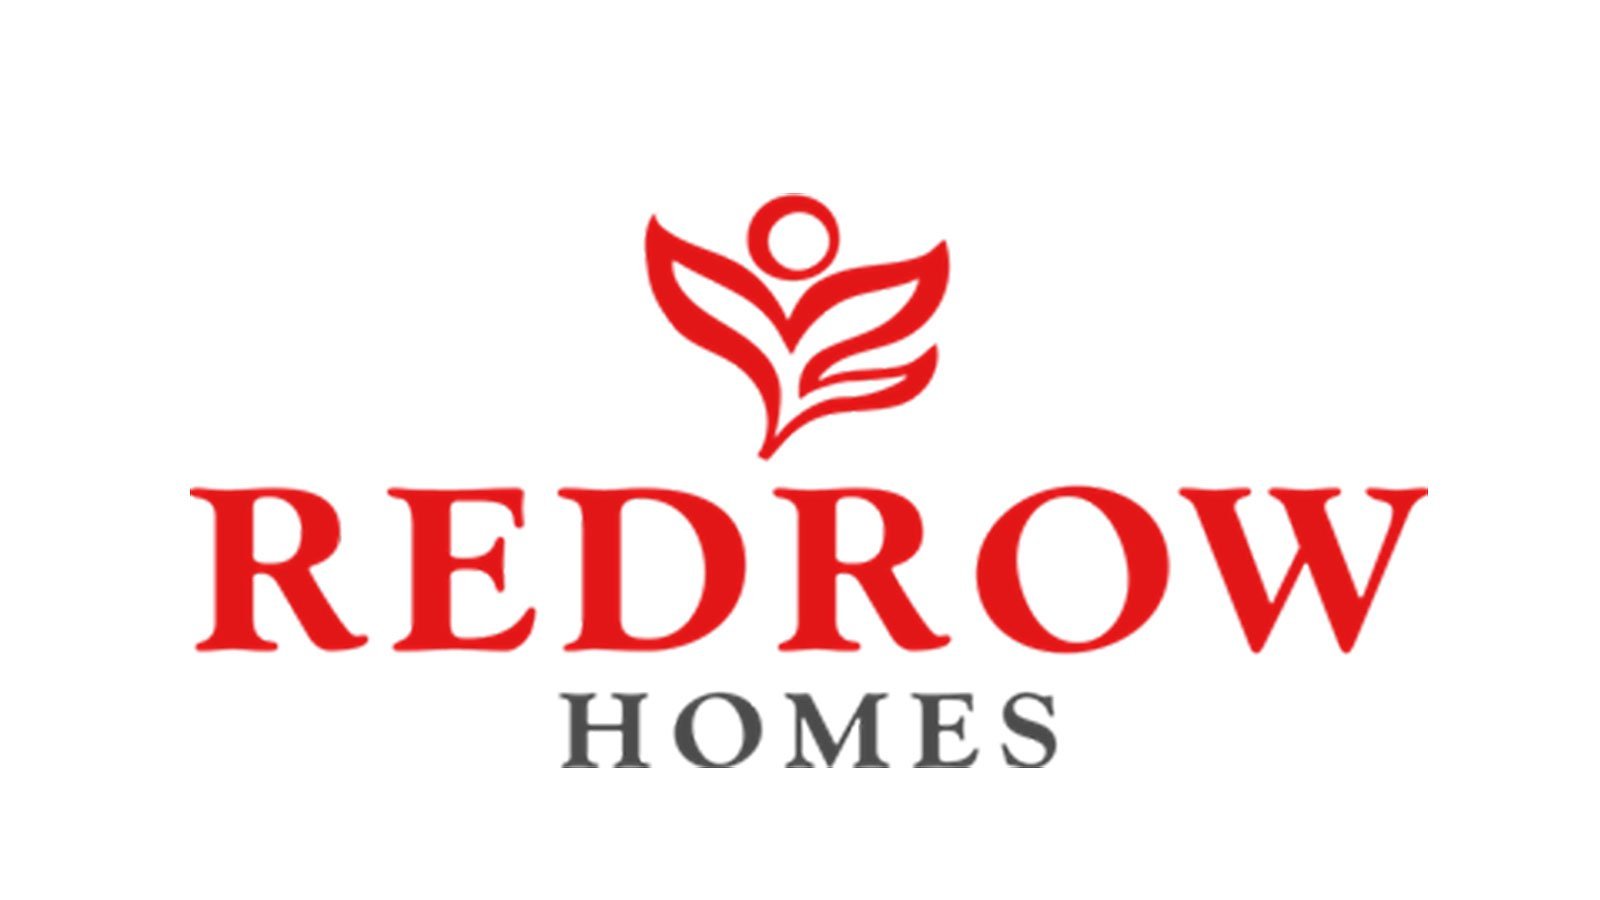 Redrow Homes Limited